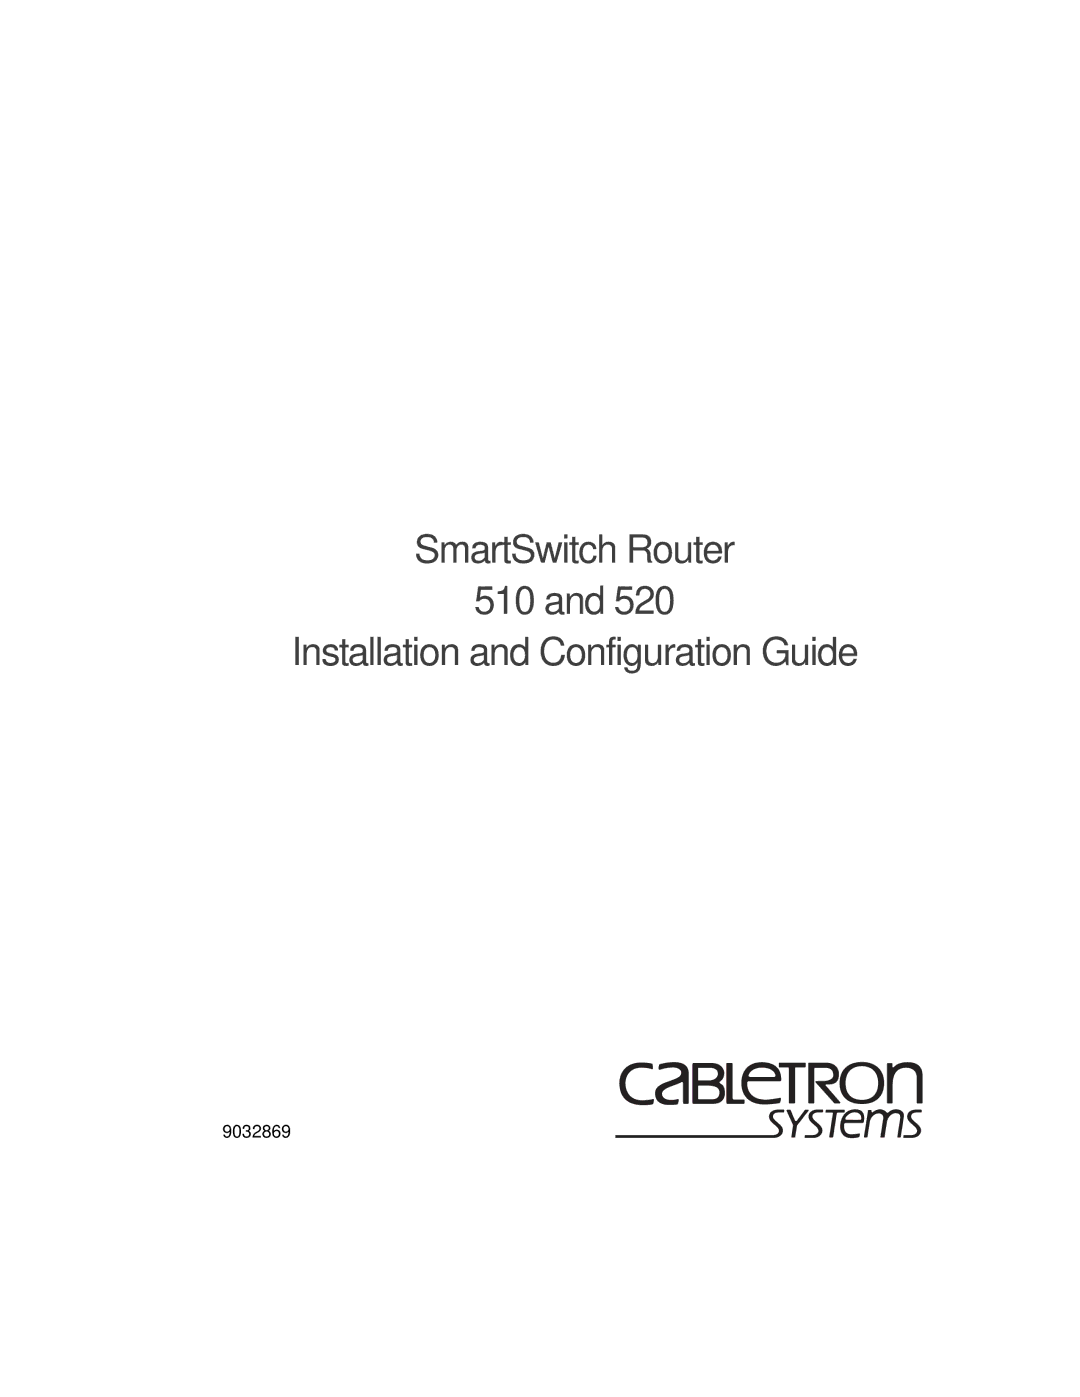 Cabletron Systems 520 manual SmartSwitch Router 510 Installation and Configuration Guide 